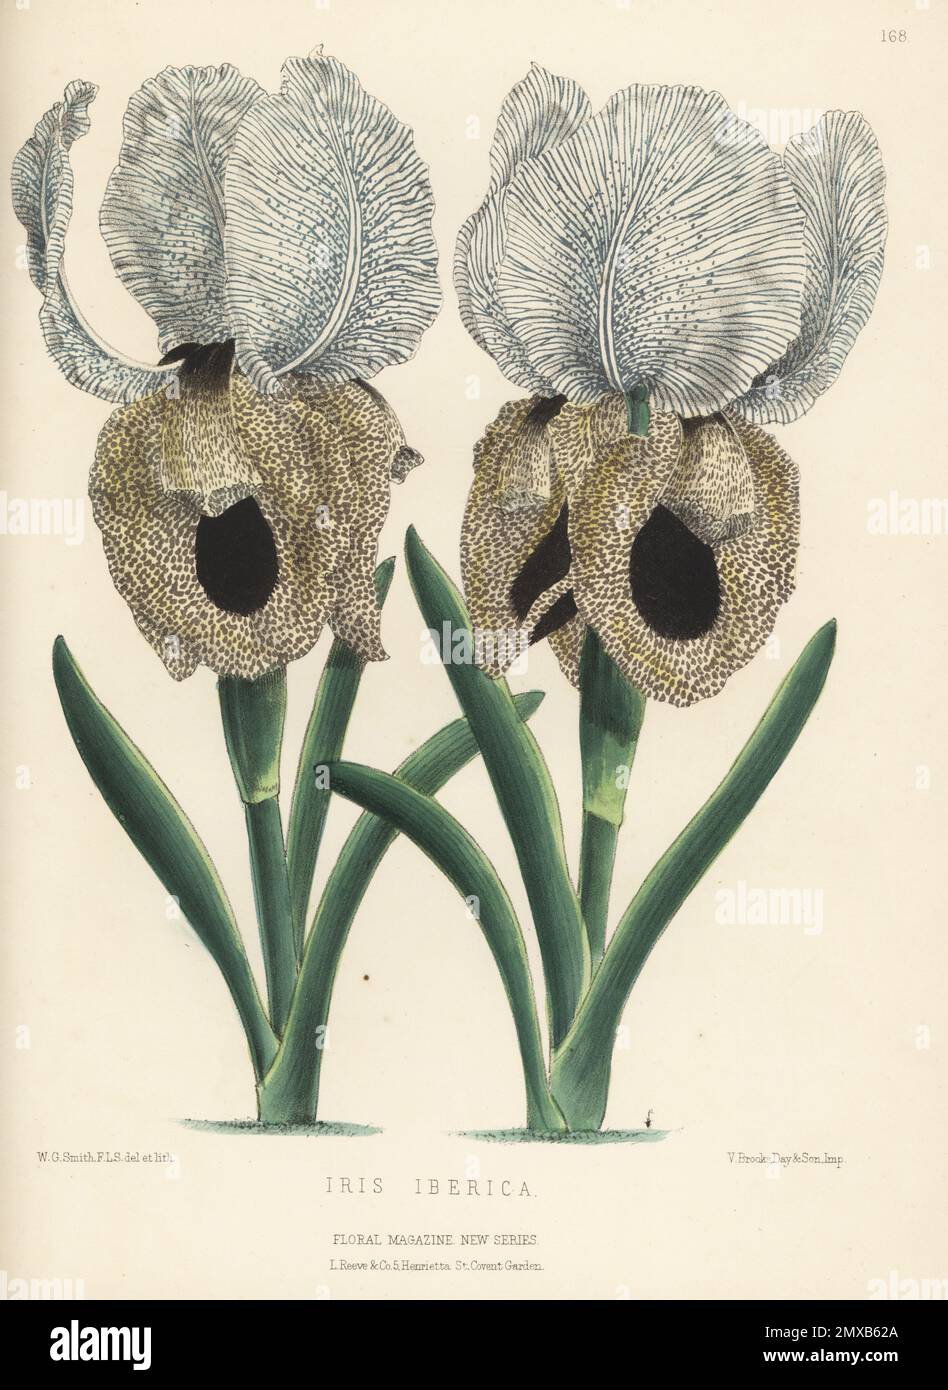 Iberian iris or Georgian iris, Iris iberica, native to the Caucasus mountains of Armenia, eastern Georgia, and western Azerbaijan. Raised by H. E. Chitty of Bellevue Nursery, New Jersey, USA. Handcolored botanical illustration drawn and lithographed by Worthington George Smith from Henry Honywood Dombrain's Floral Magazine, New Series, Volume 3, L. Reeve, London, 1874. Lithograph printed by Vincent Brooks, Day & Son. Stock Photo